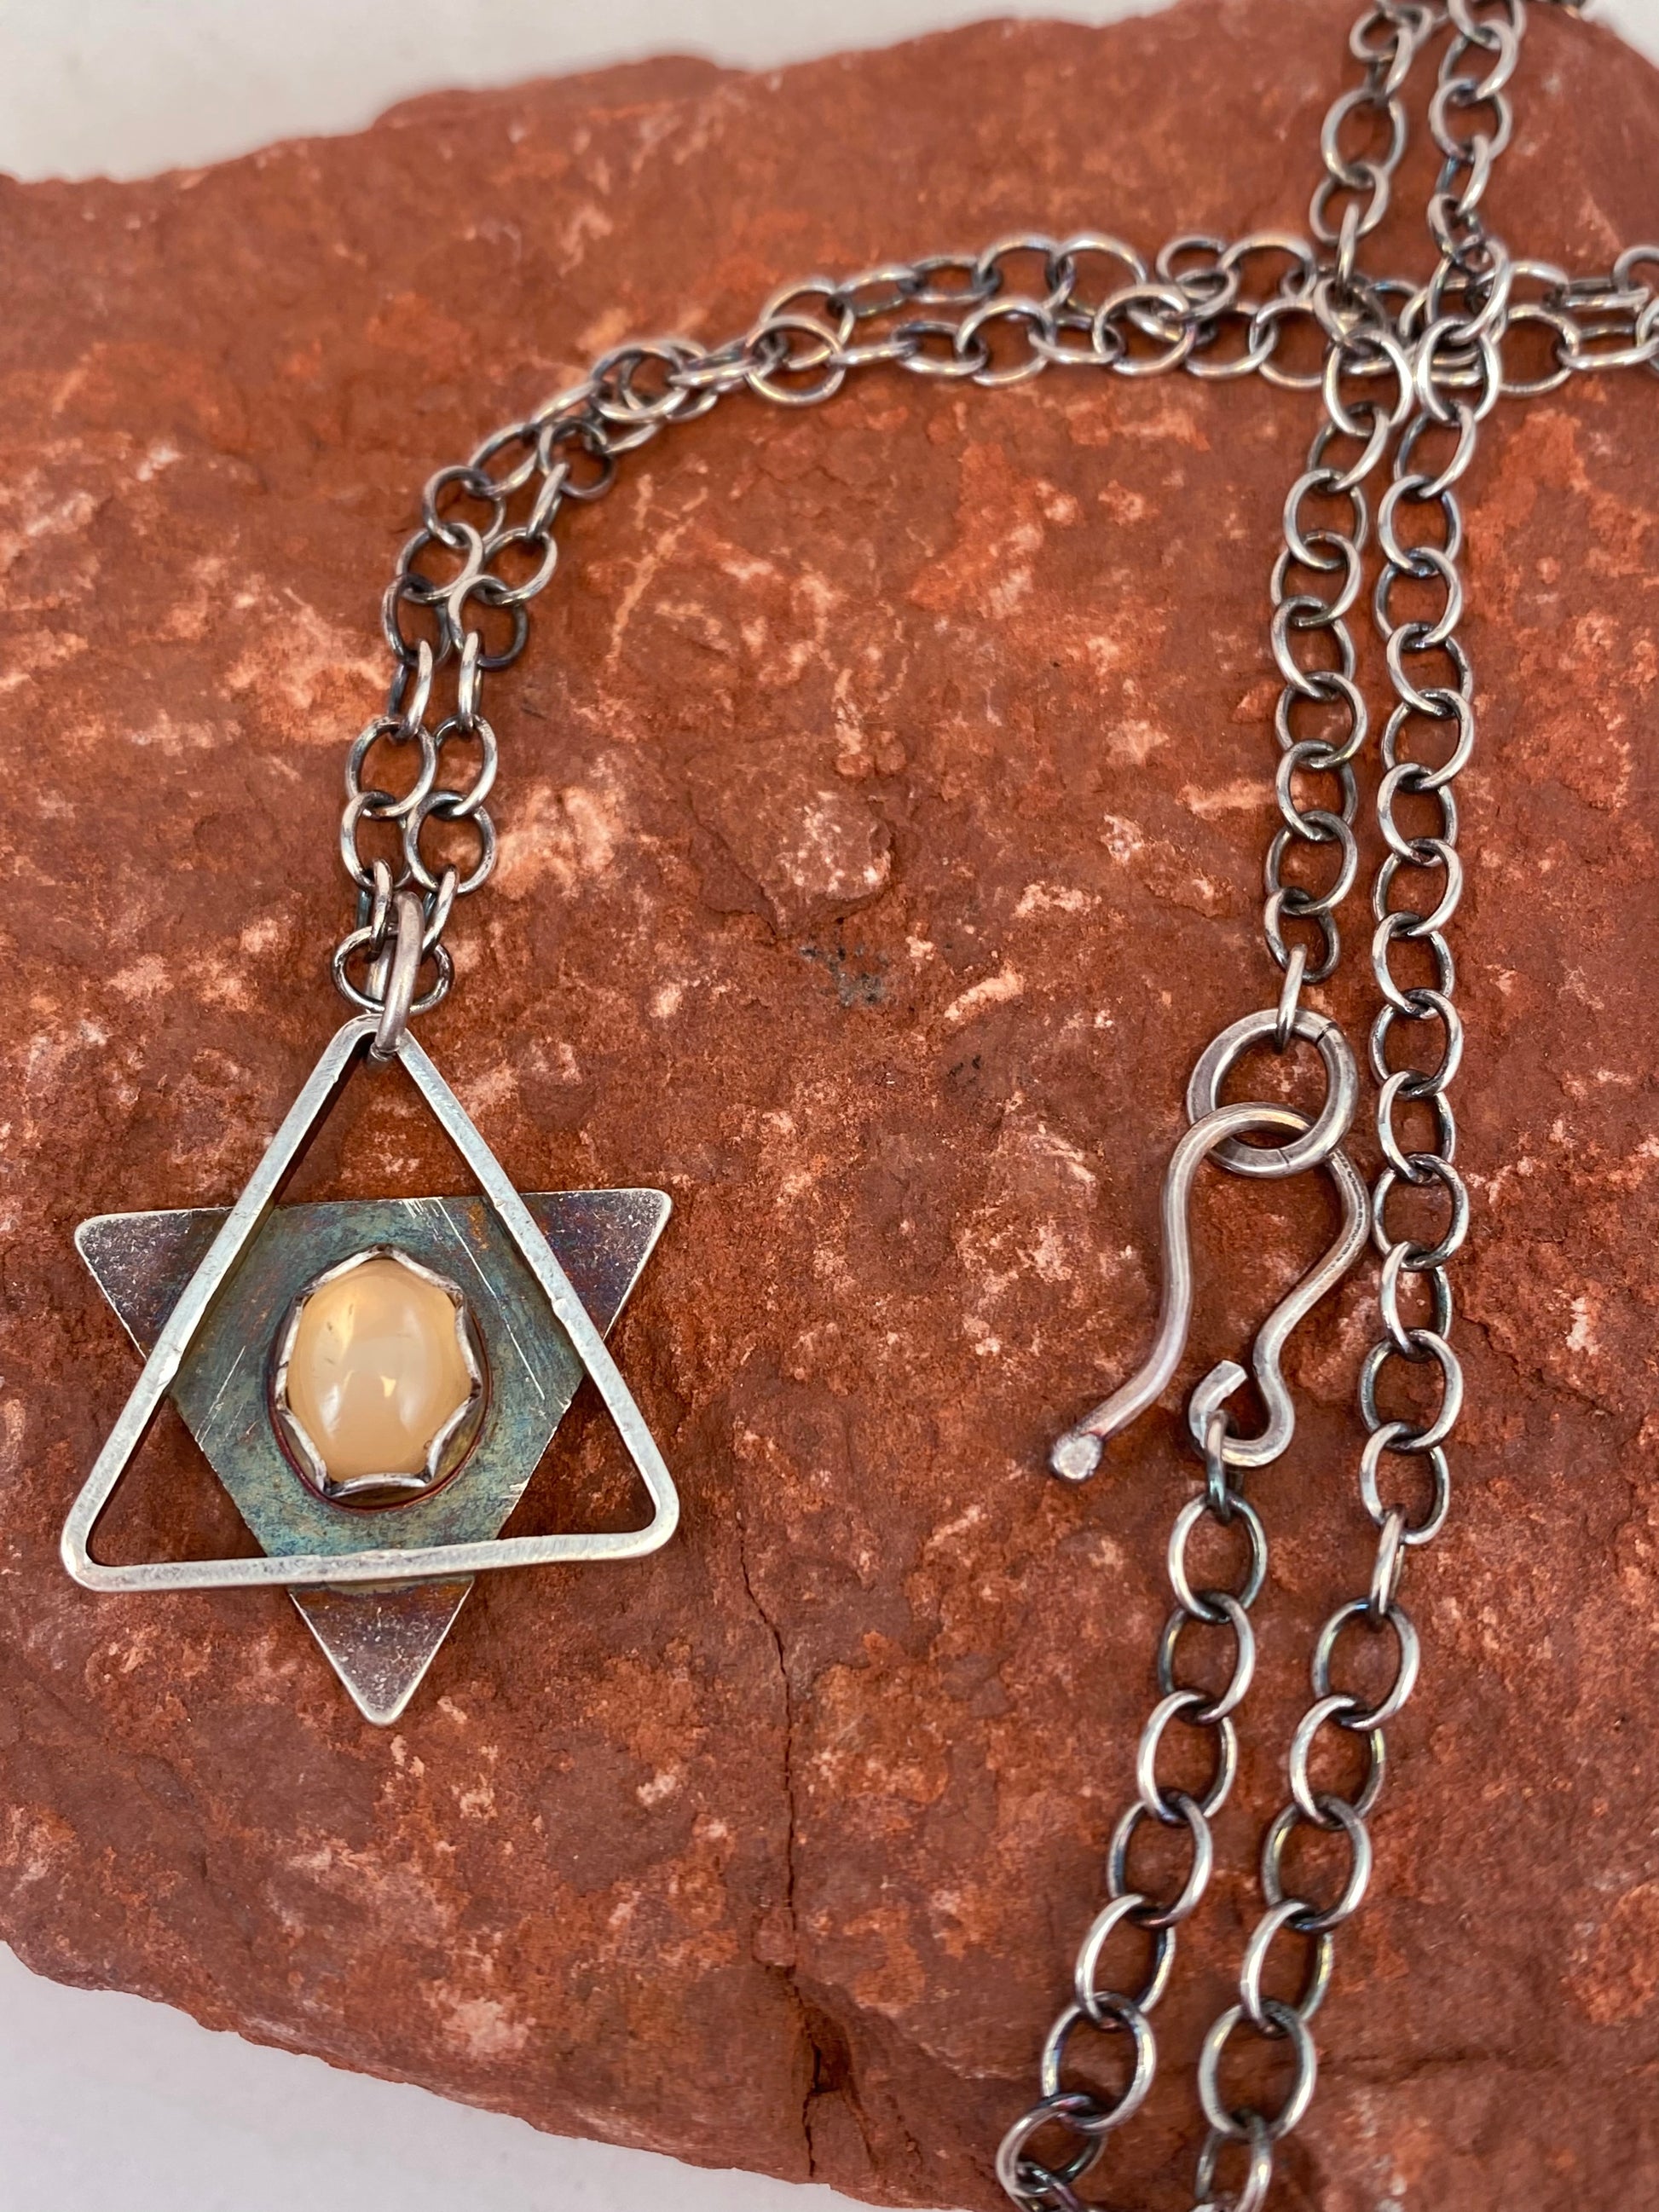 * Handmade Magen David (Star of David) necklace, sterling silver with sunstone.